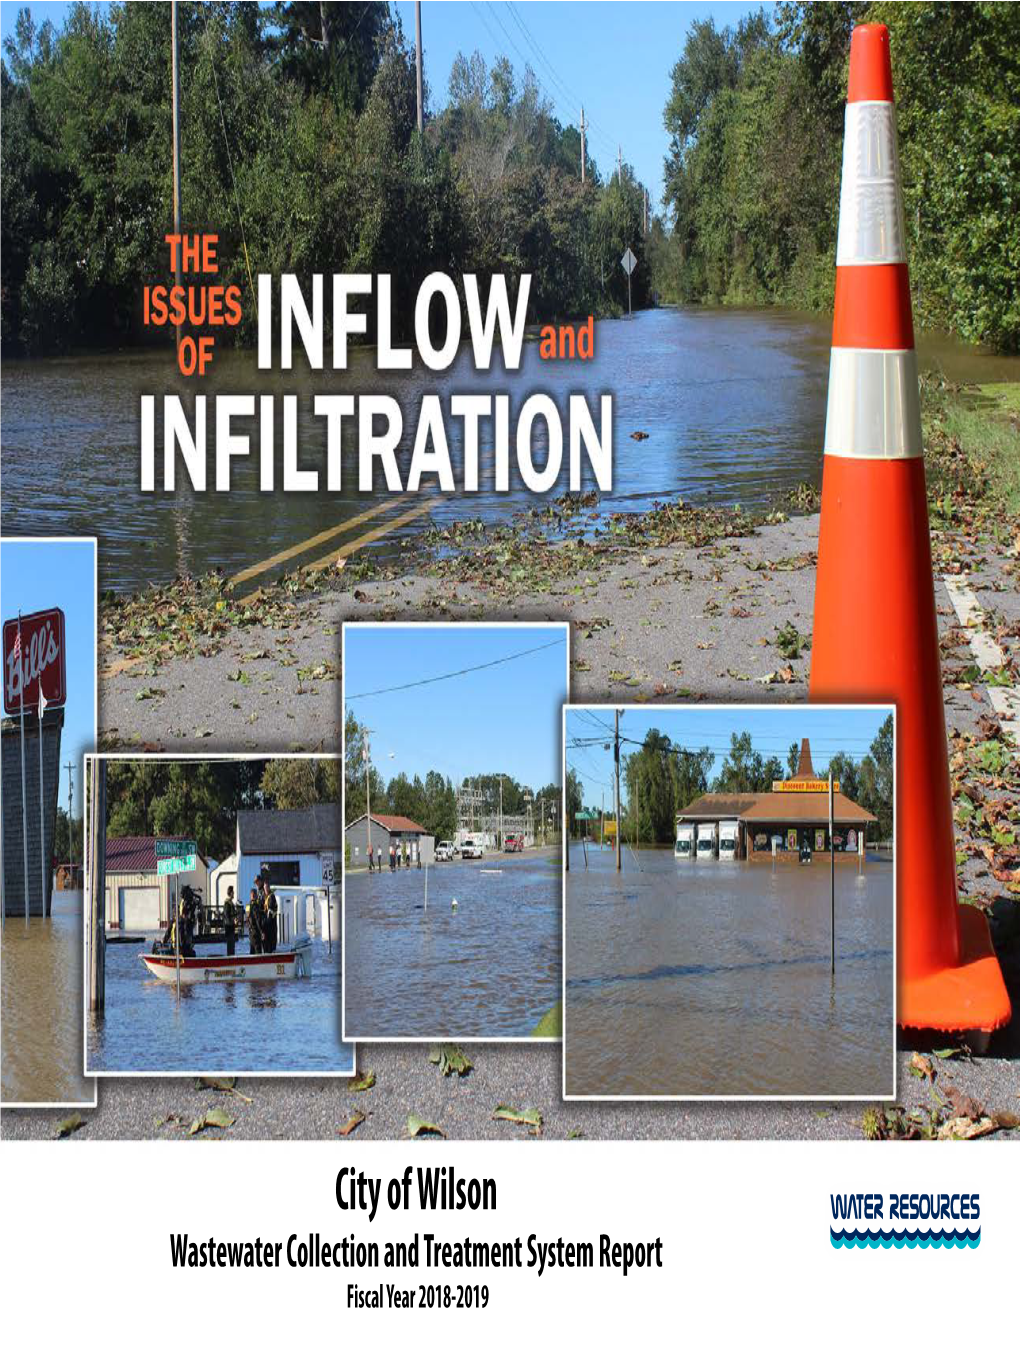 The Issues of Inflow and Infiltration